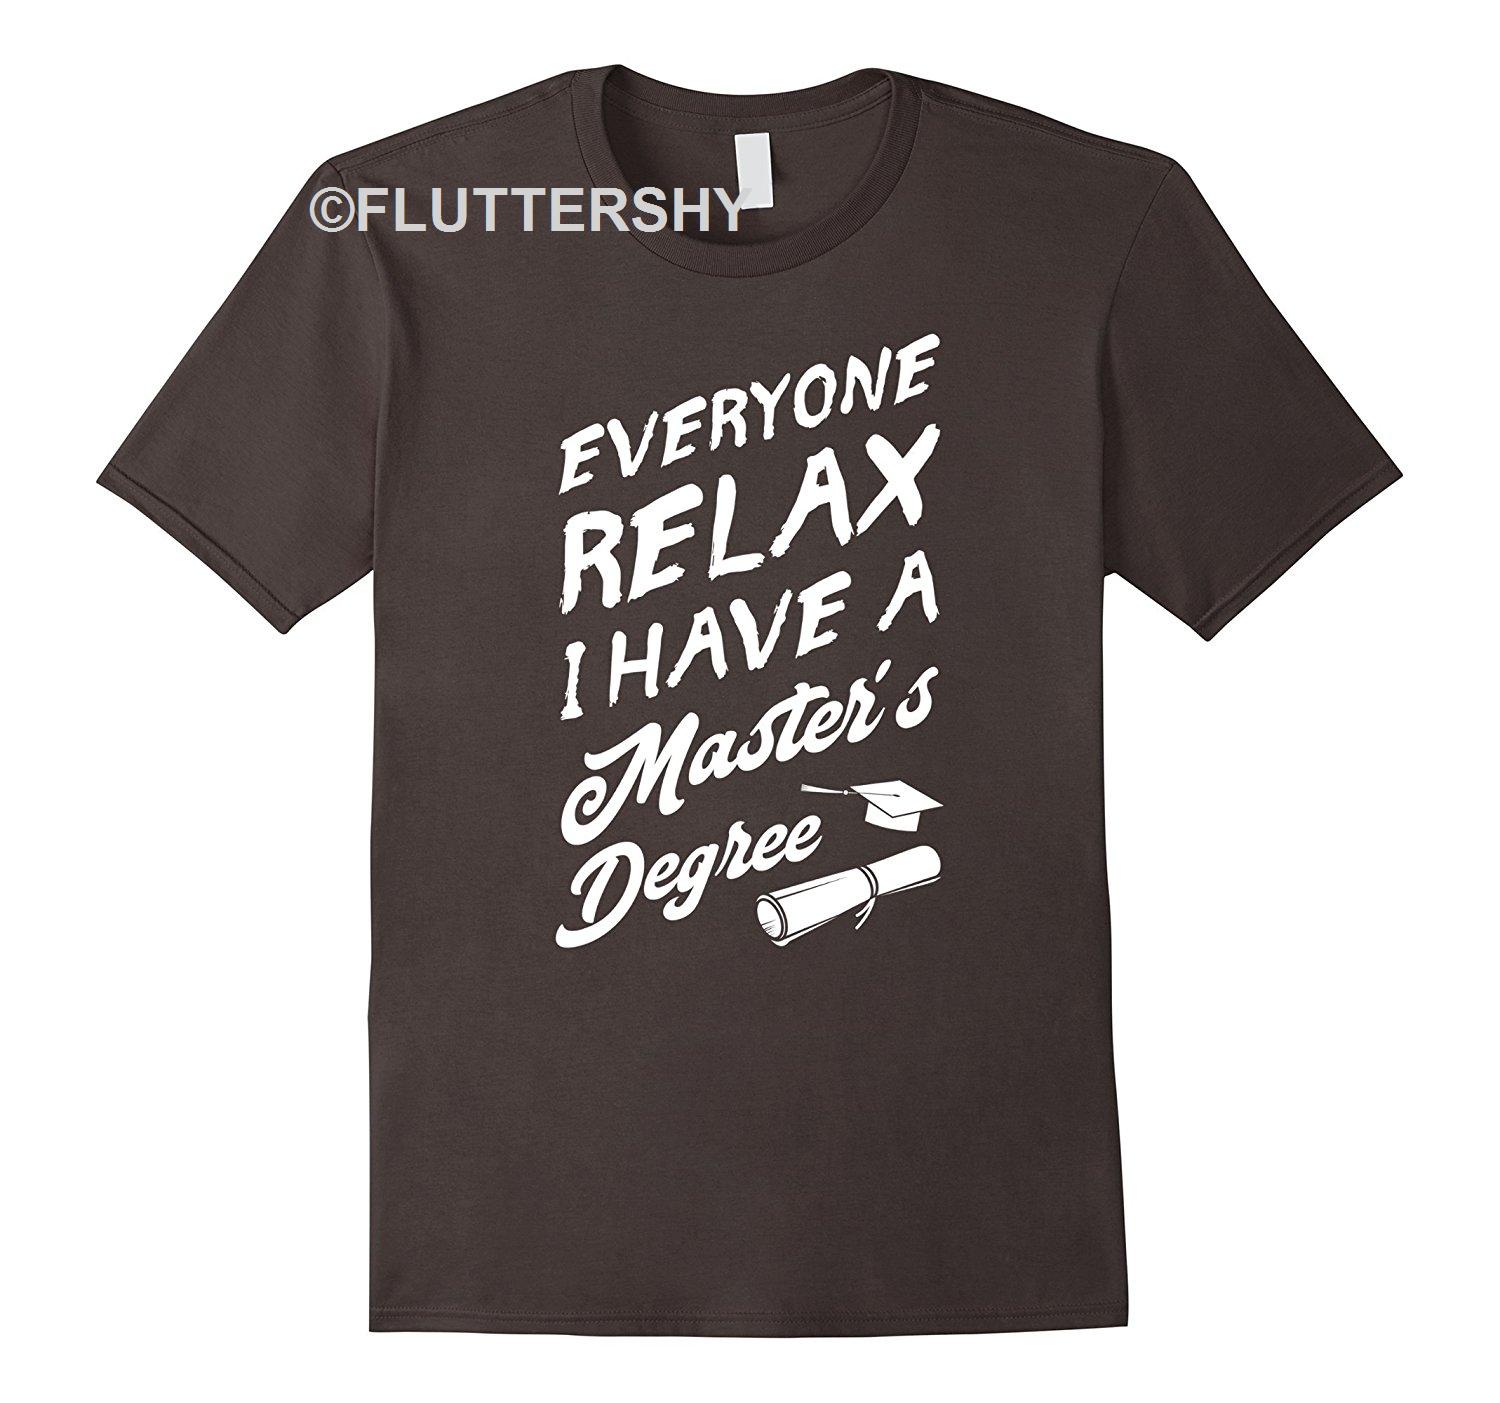 Funny Shop Relax I Have A Masters Degree - Graduation Gift T-shirt